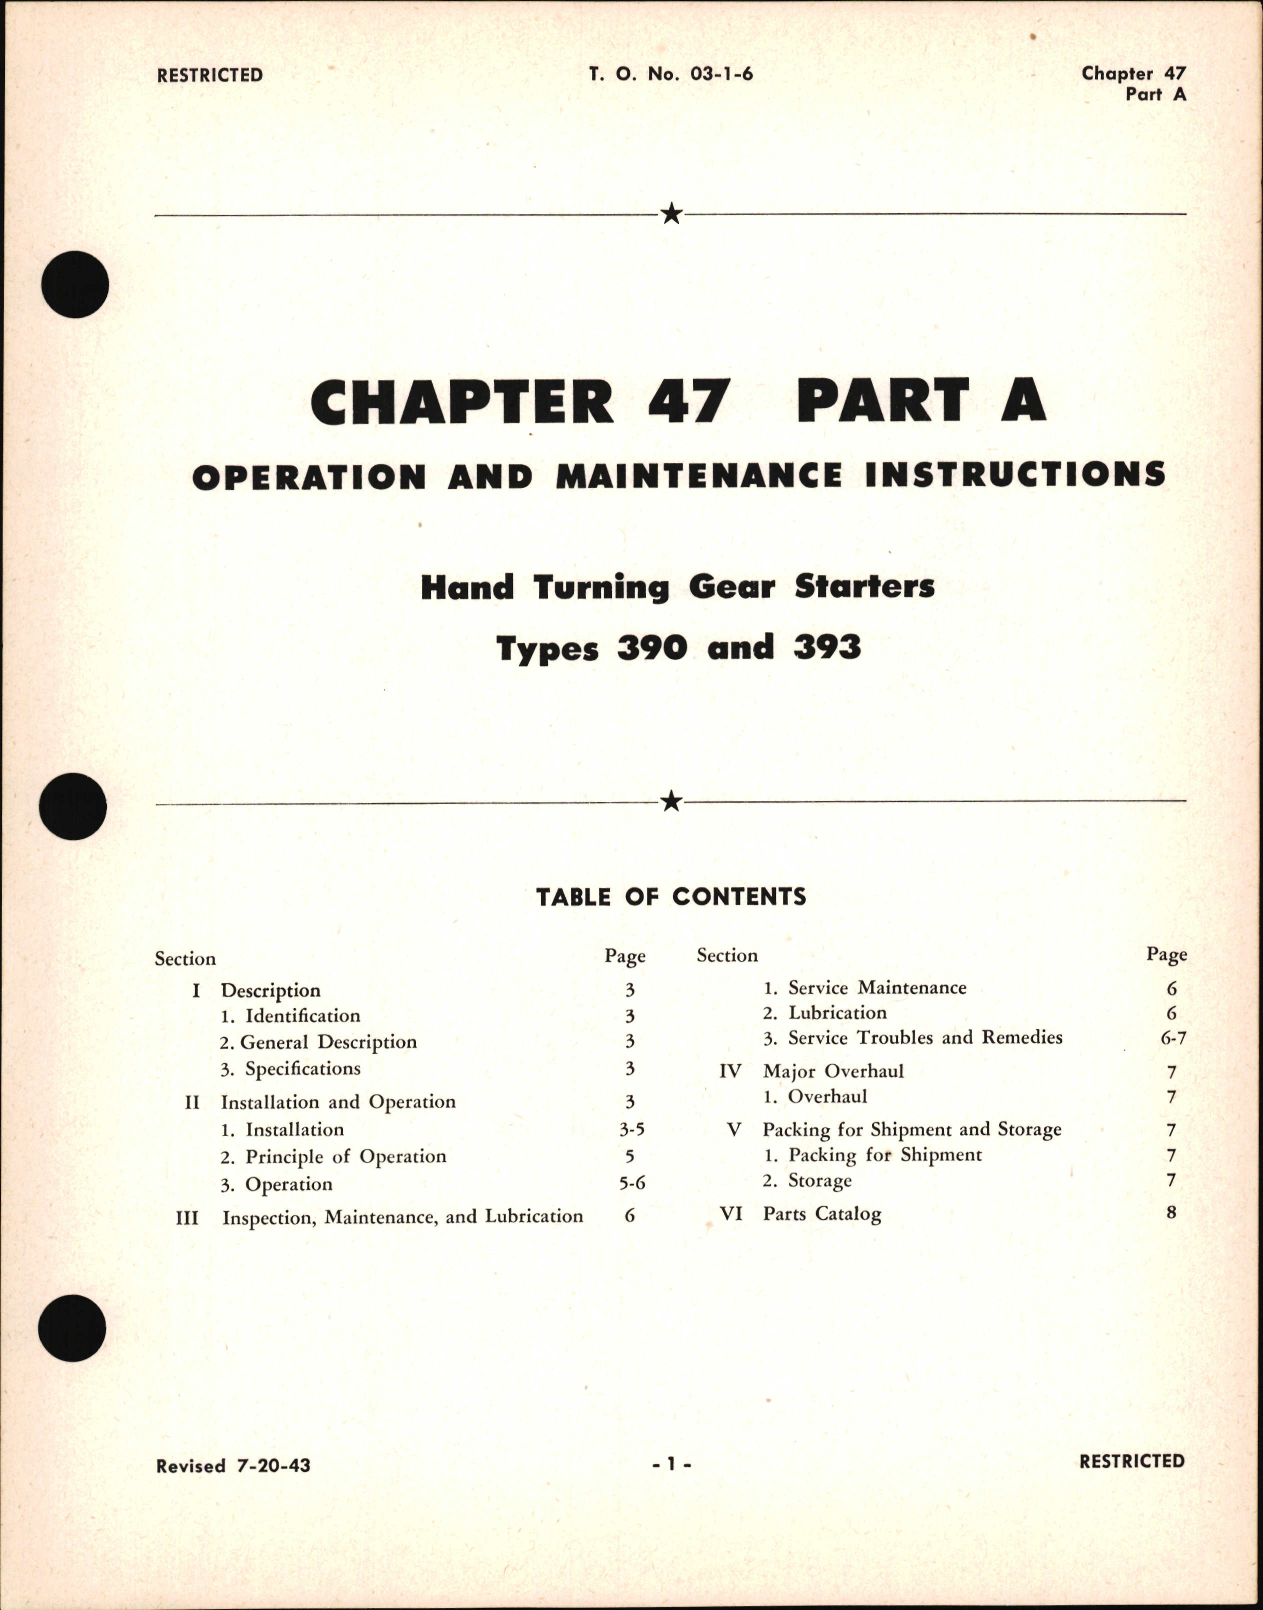 Sample page 1 from AirCorps Library document: Operation and Maintenance Instructions for Hand Turning Gear Starters, Chapter 47 Part A